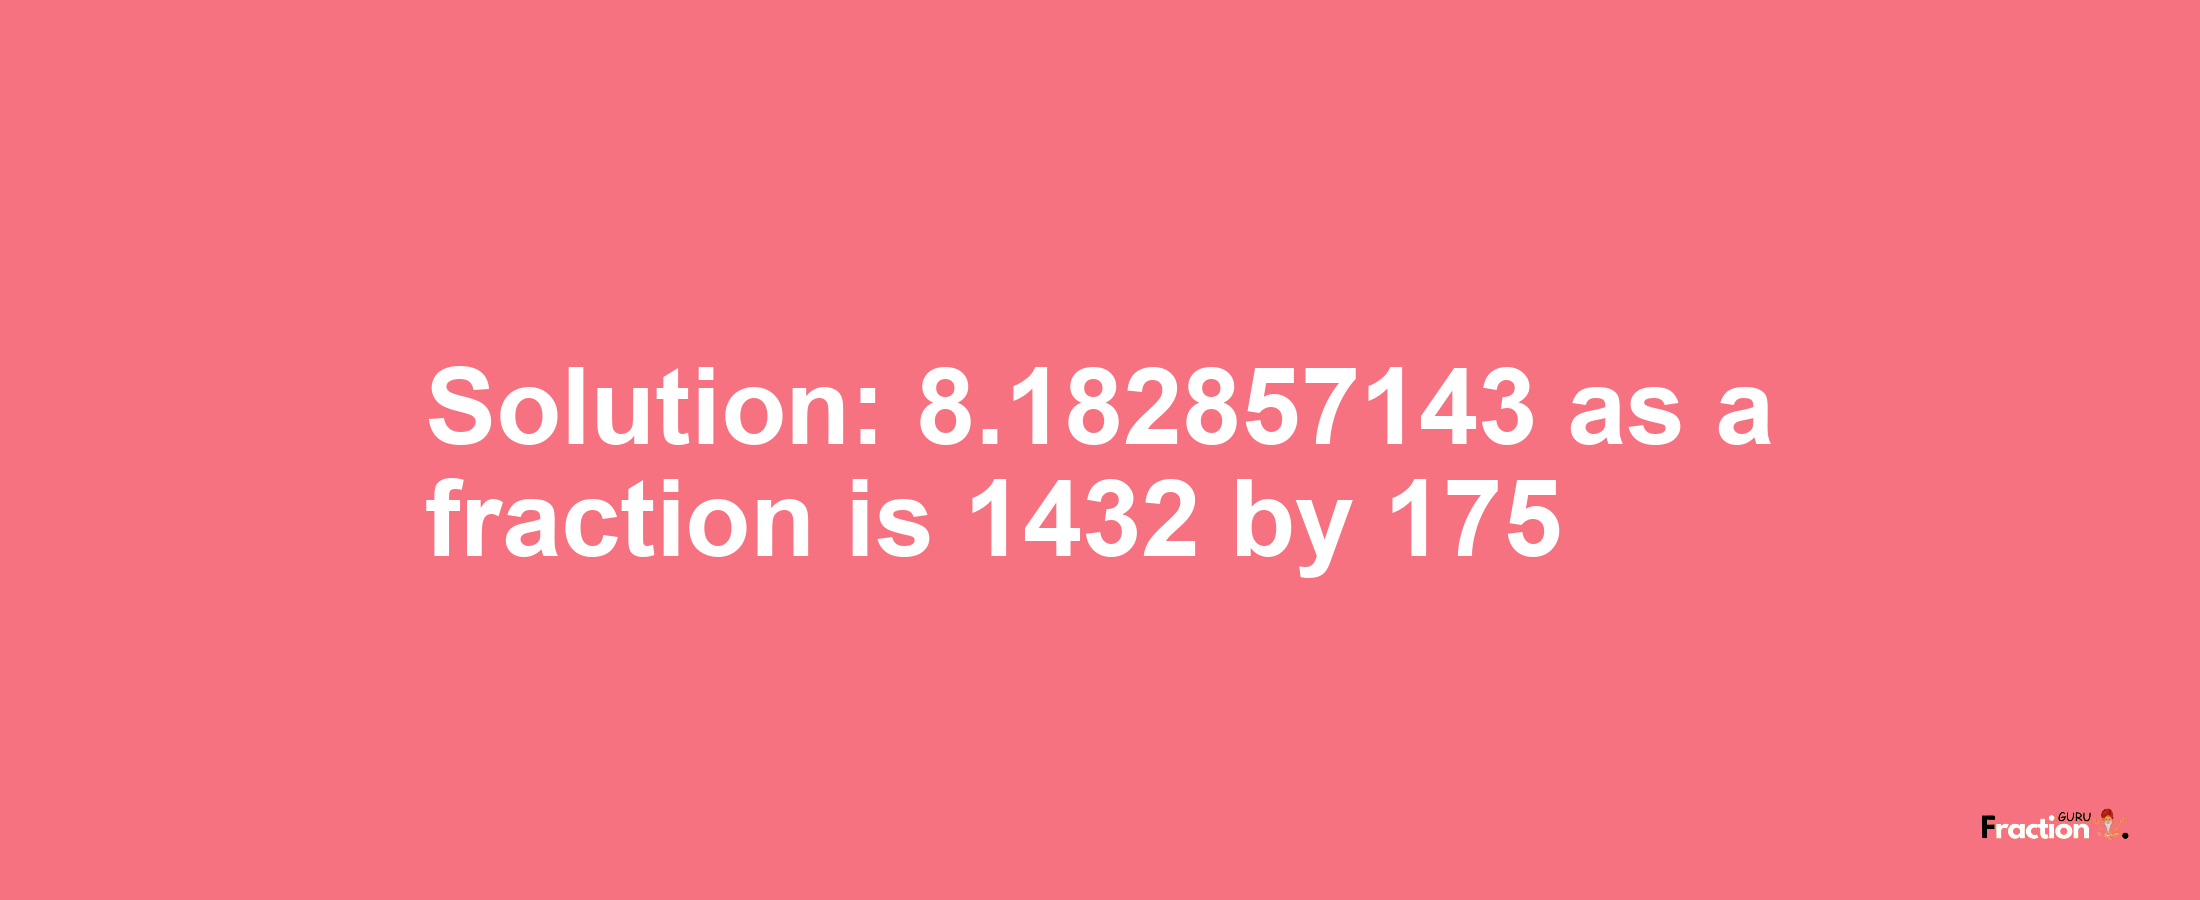 Solution:8.182857143 as a fraction is 1432/175